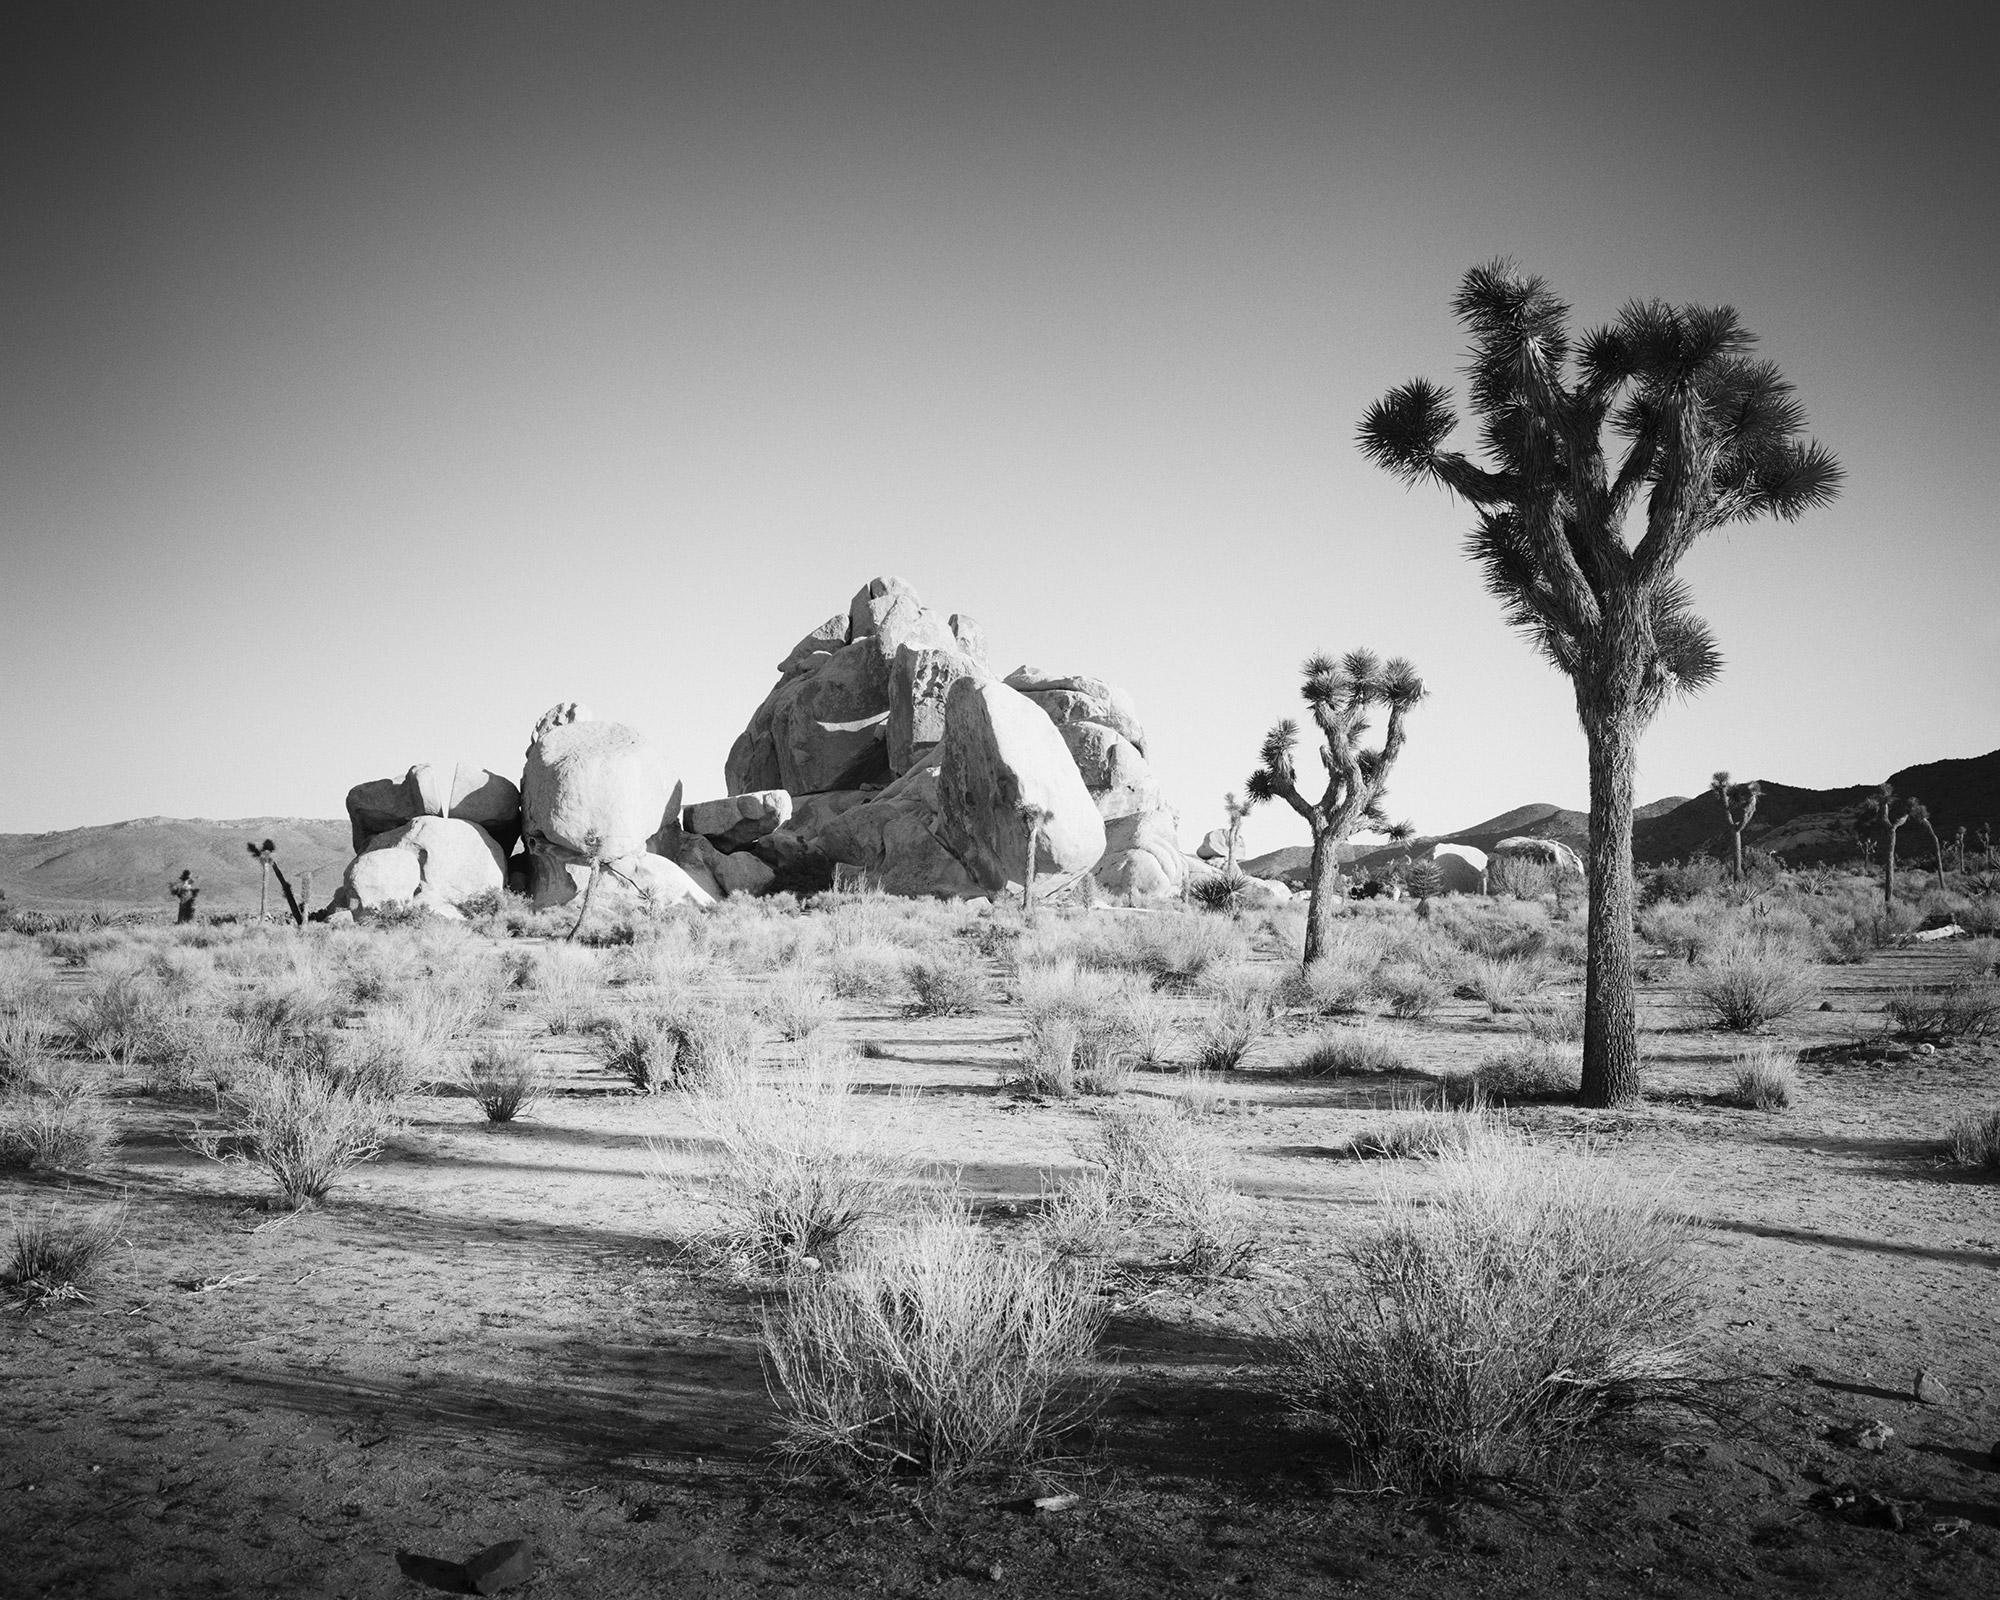 Gerald Berghammer Landscape Photograph - Joshua Trees and Rocks, California, USA, black and white photography, landscape